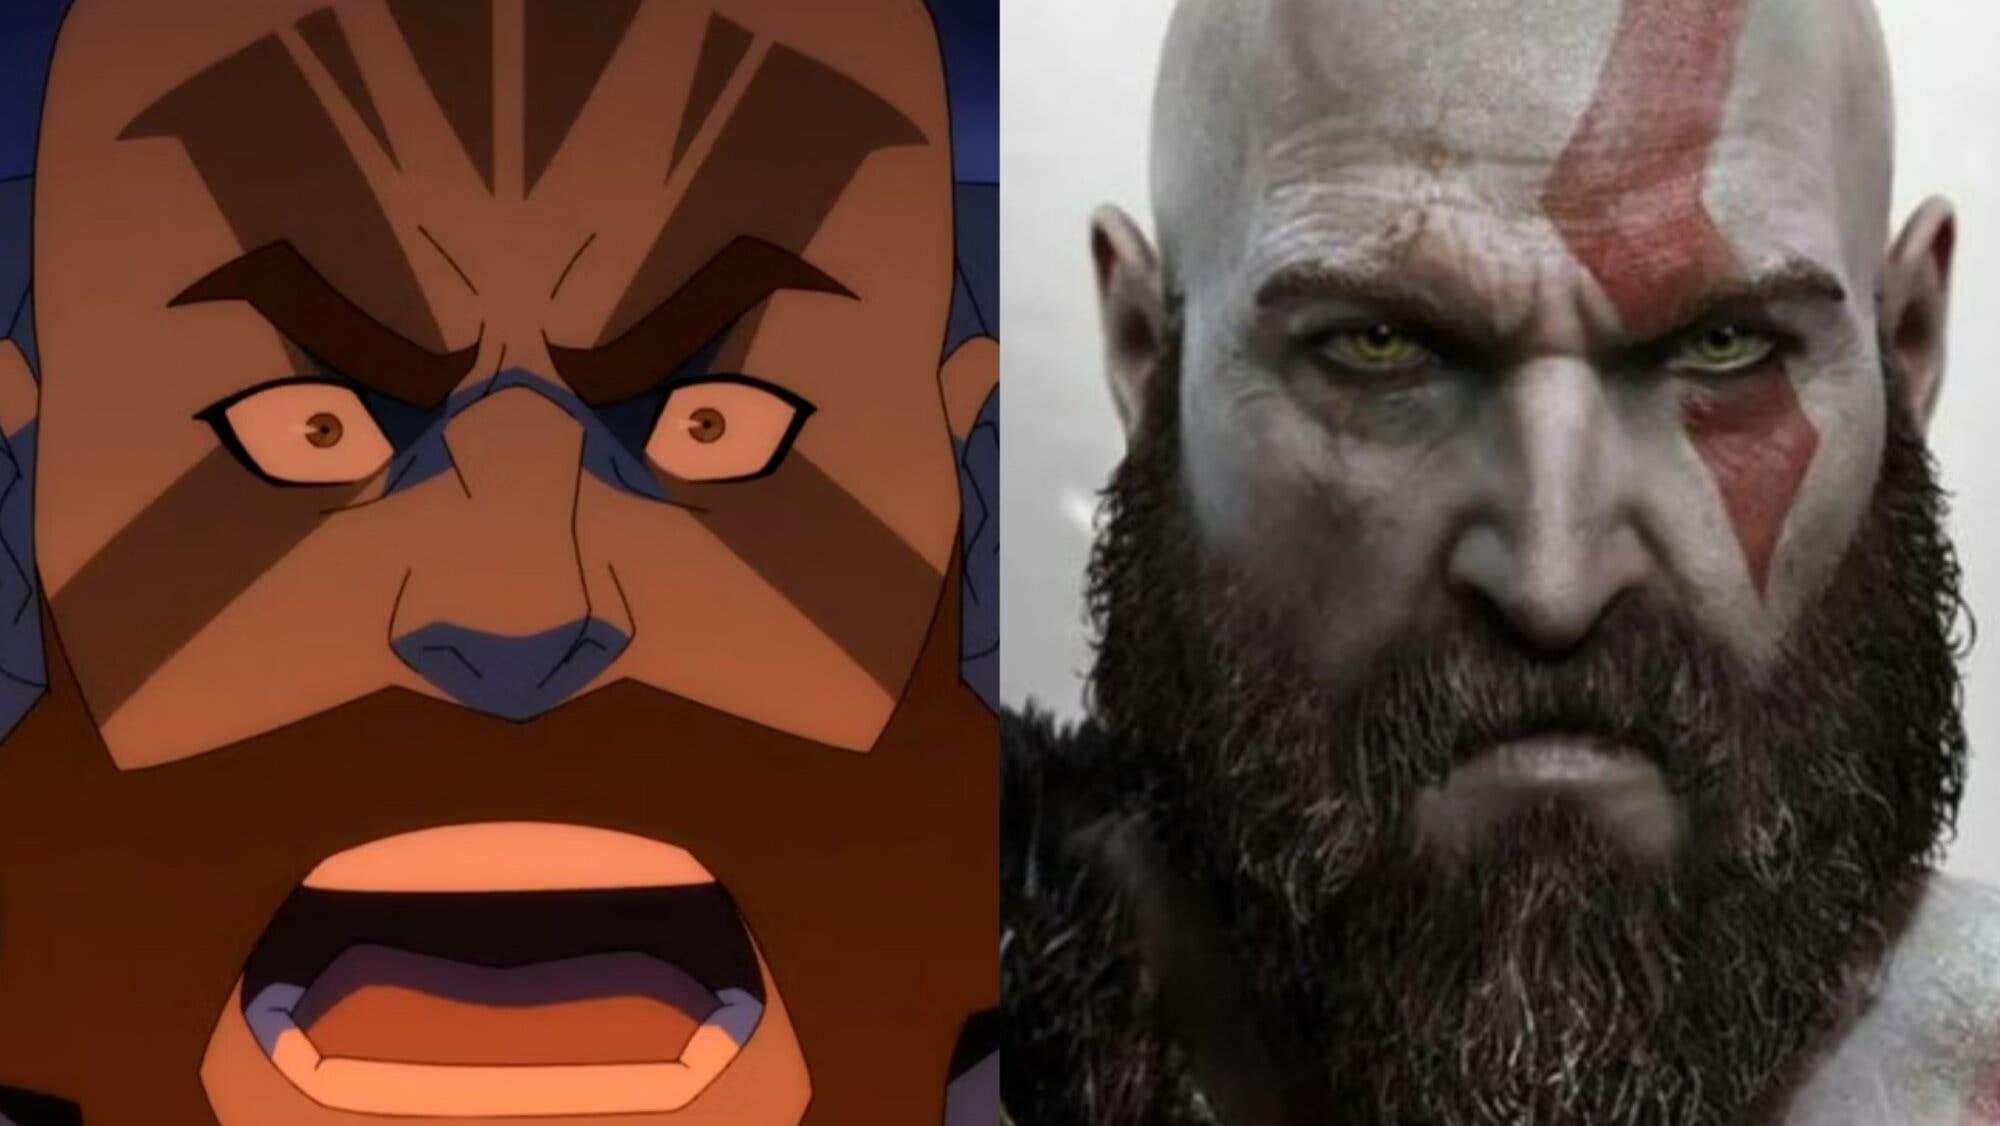 God of War has no anime, but in this series you will find the lookalike of Kratos